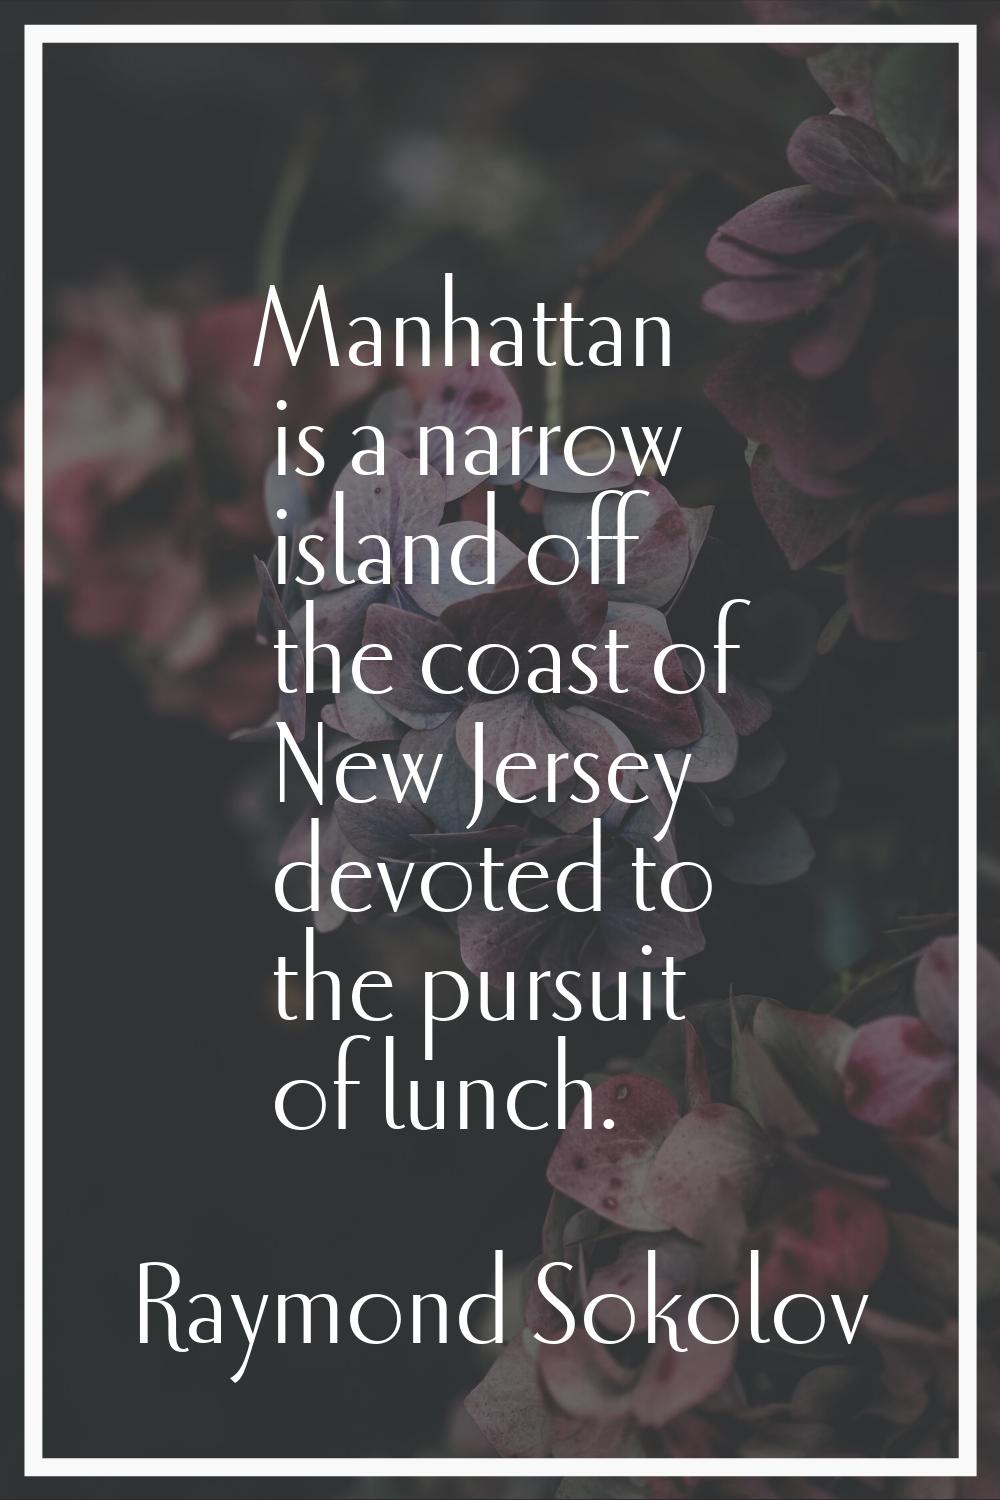 Manhattan is a narrow island off the coast of New Jersey devoted to the pursuit of lunch.